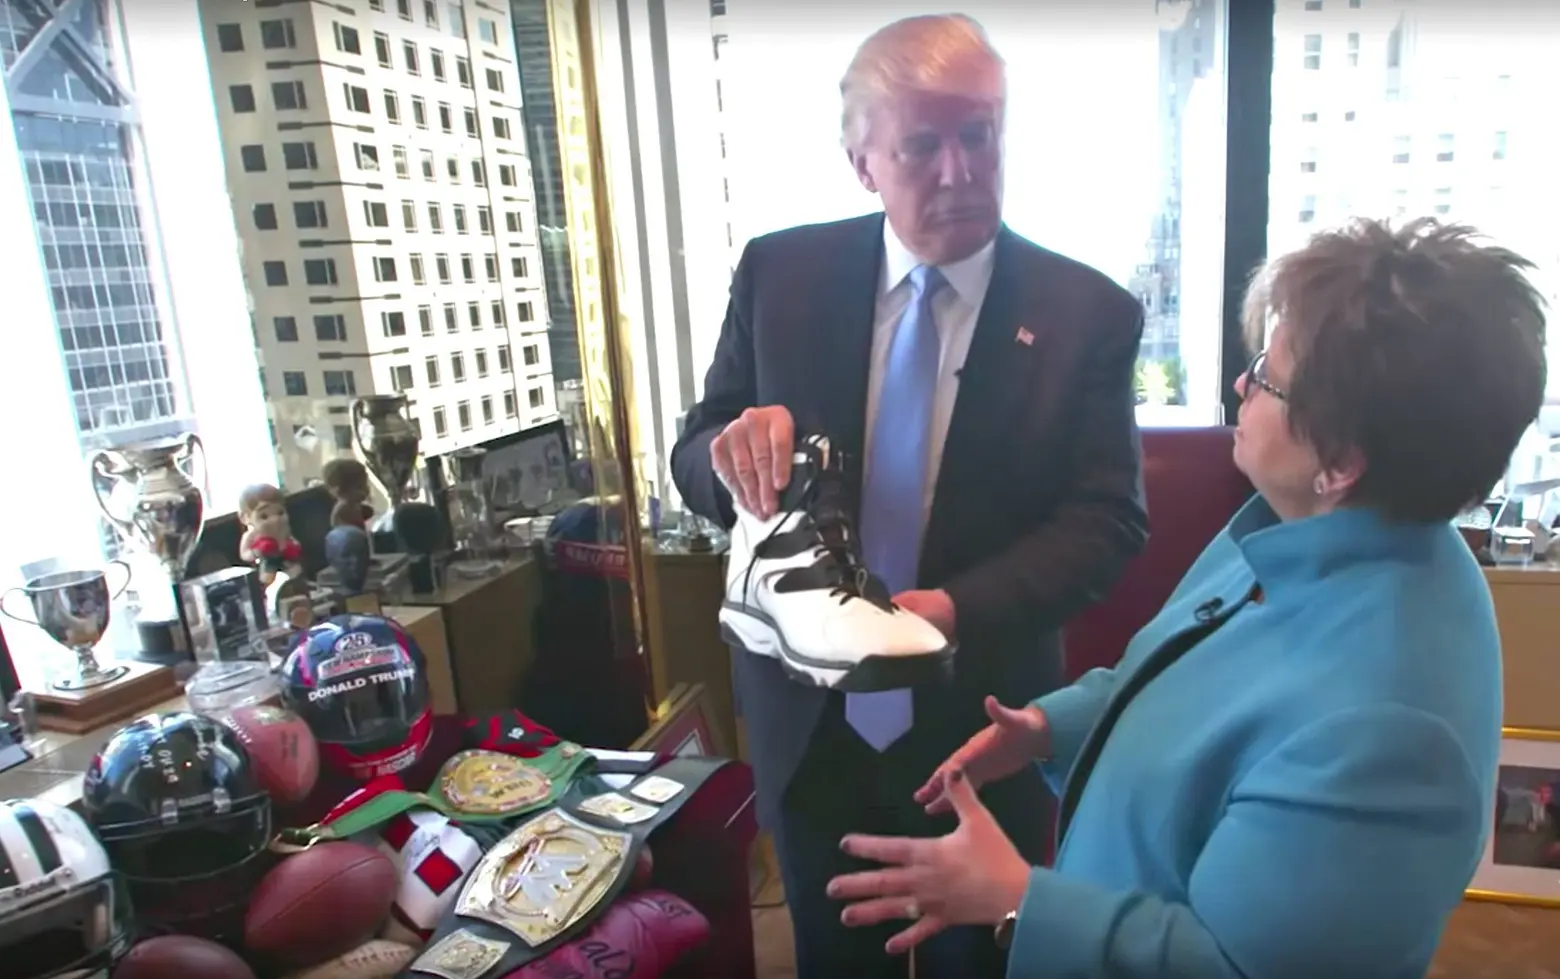 VIDEO: Go inside Donald Trump’s personal office in Trump Tower